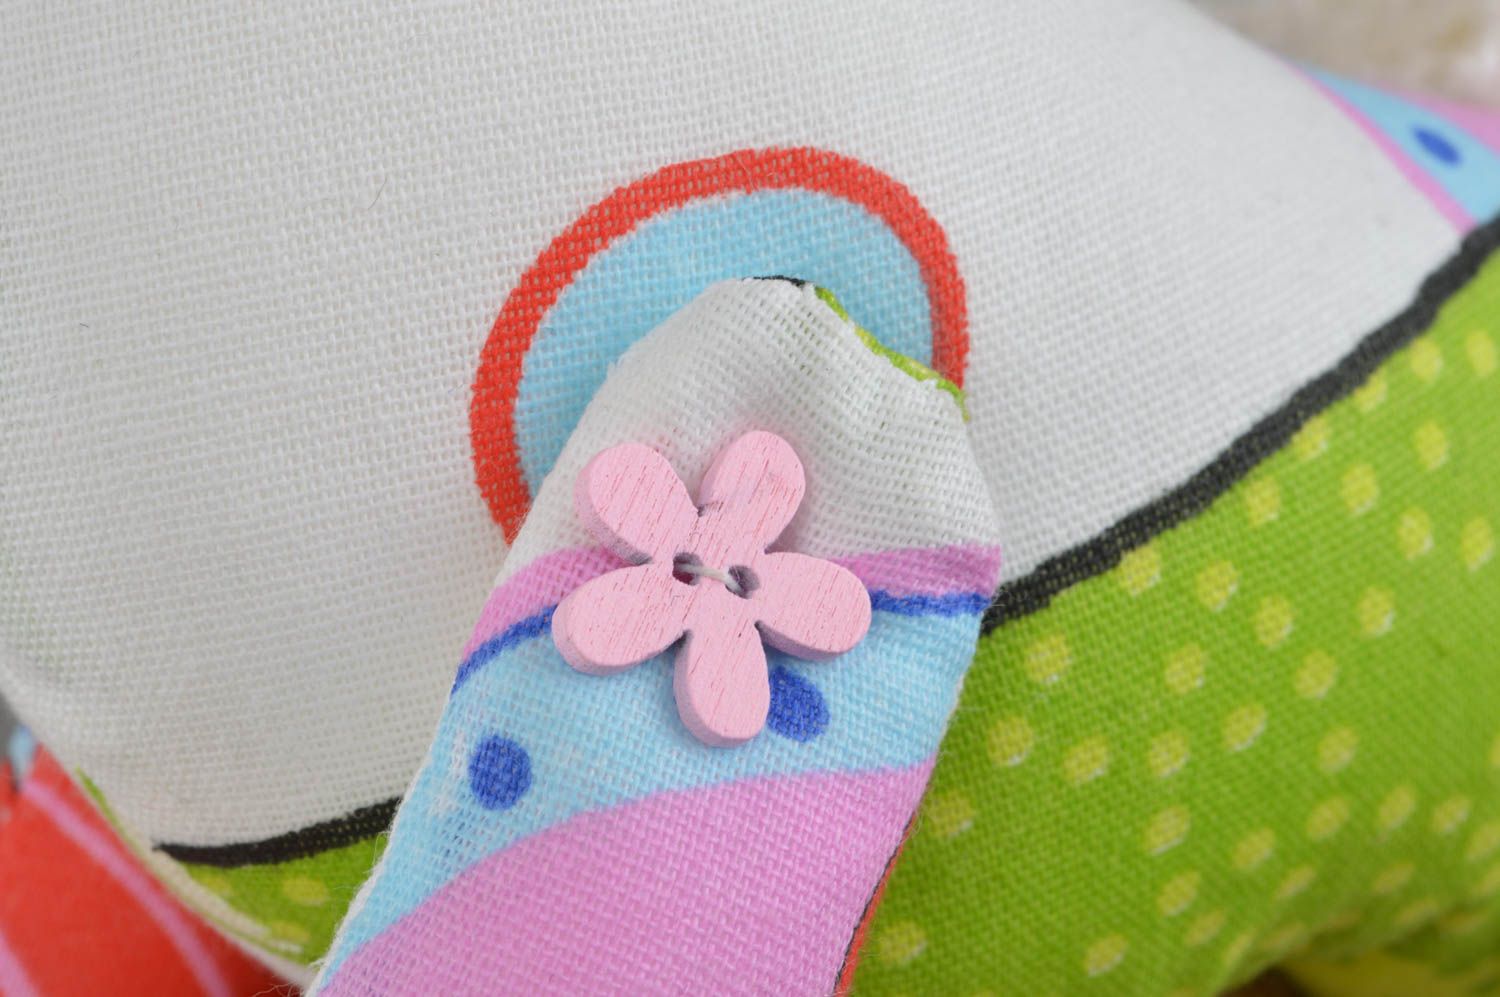 Small handmade fabric soft toy colorful stuffed toy for children home designs photo 5